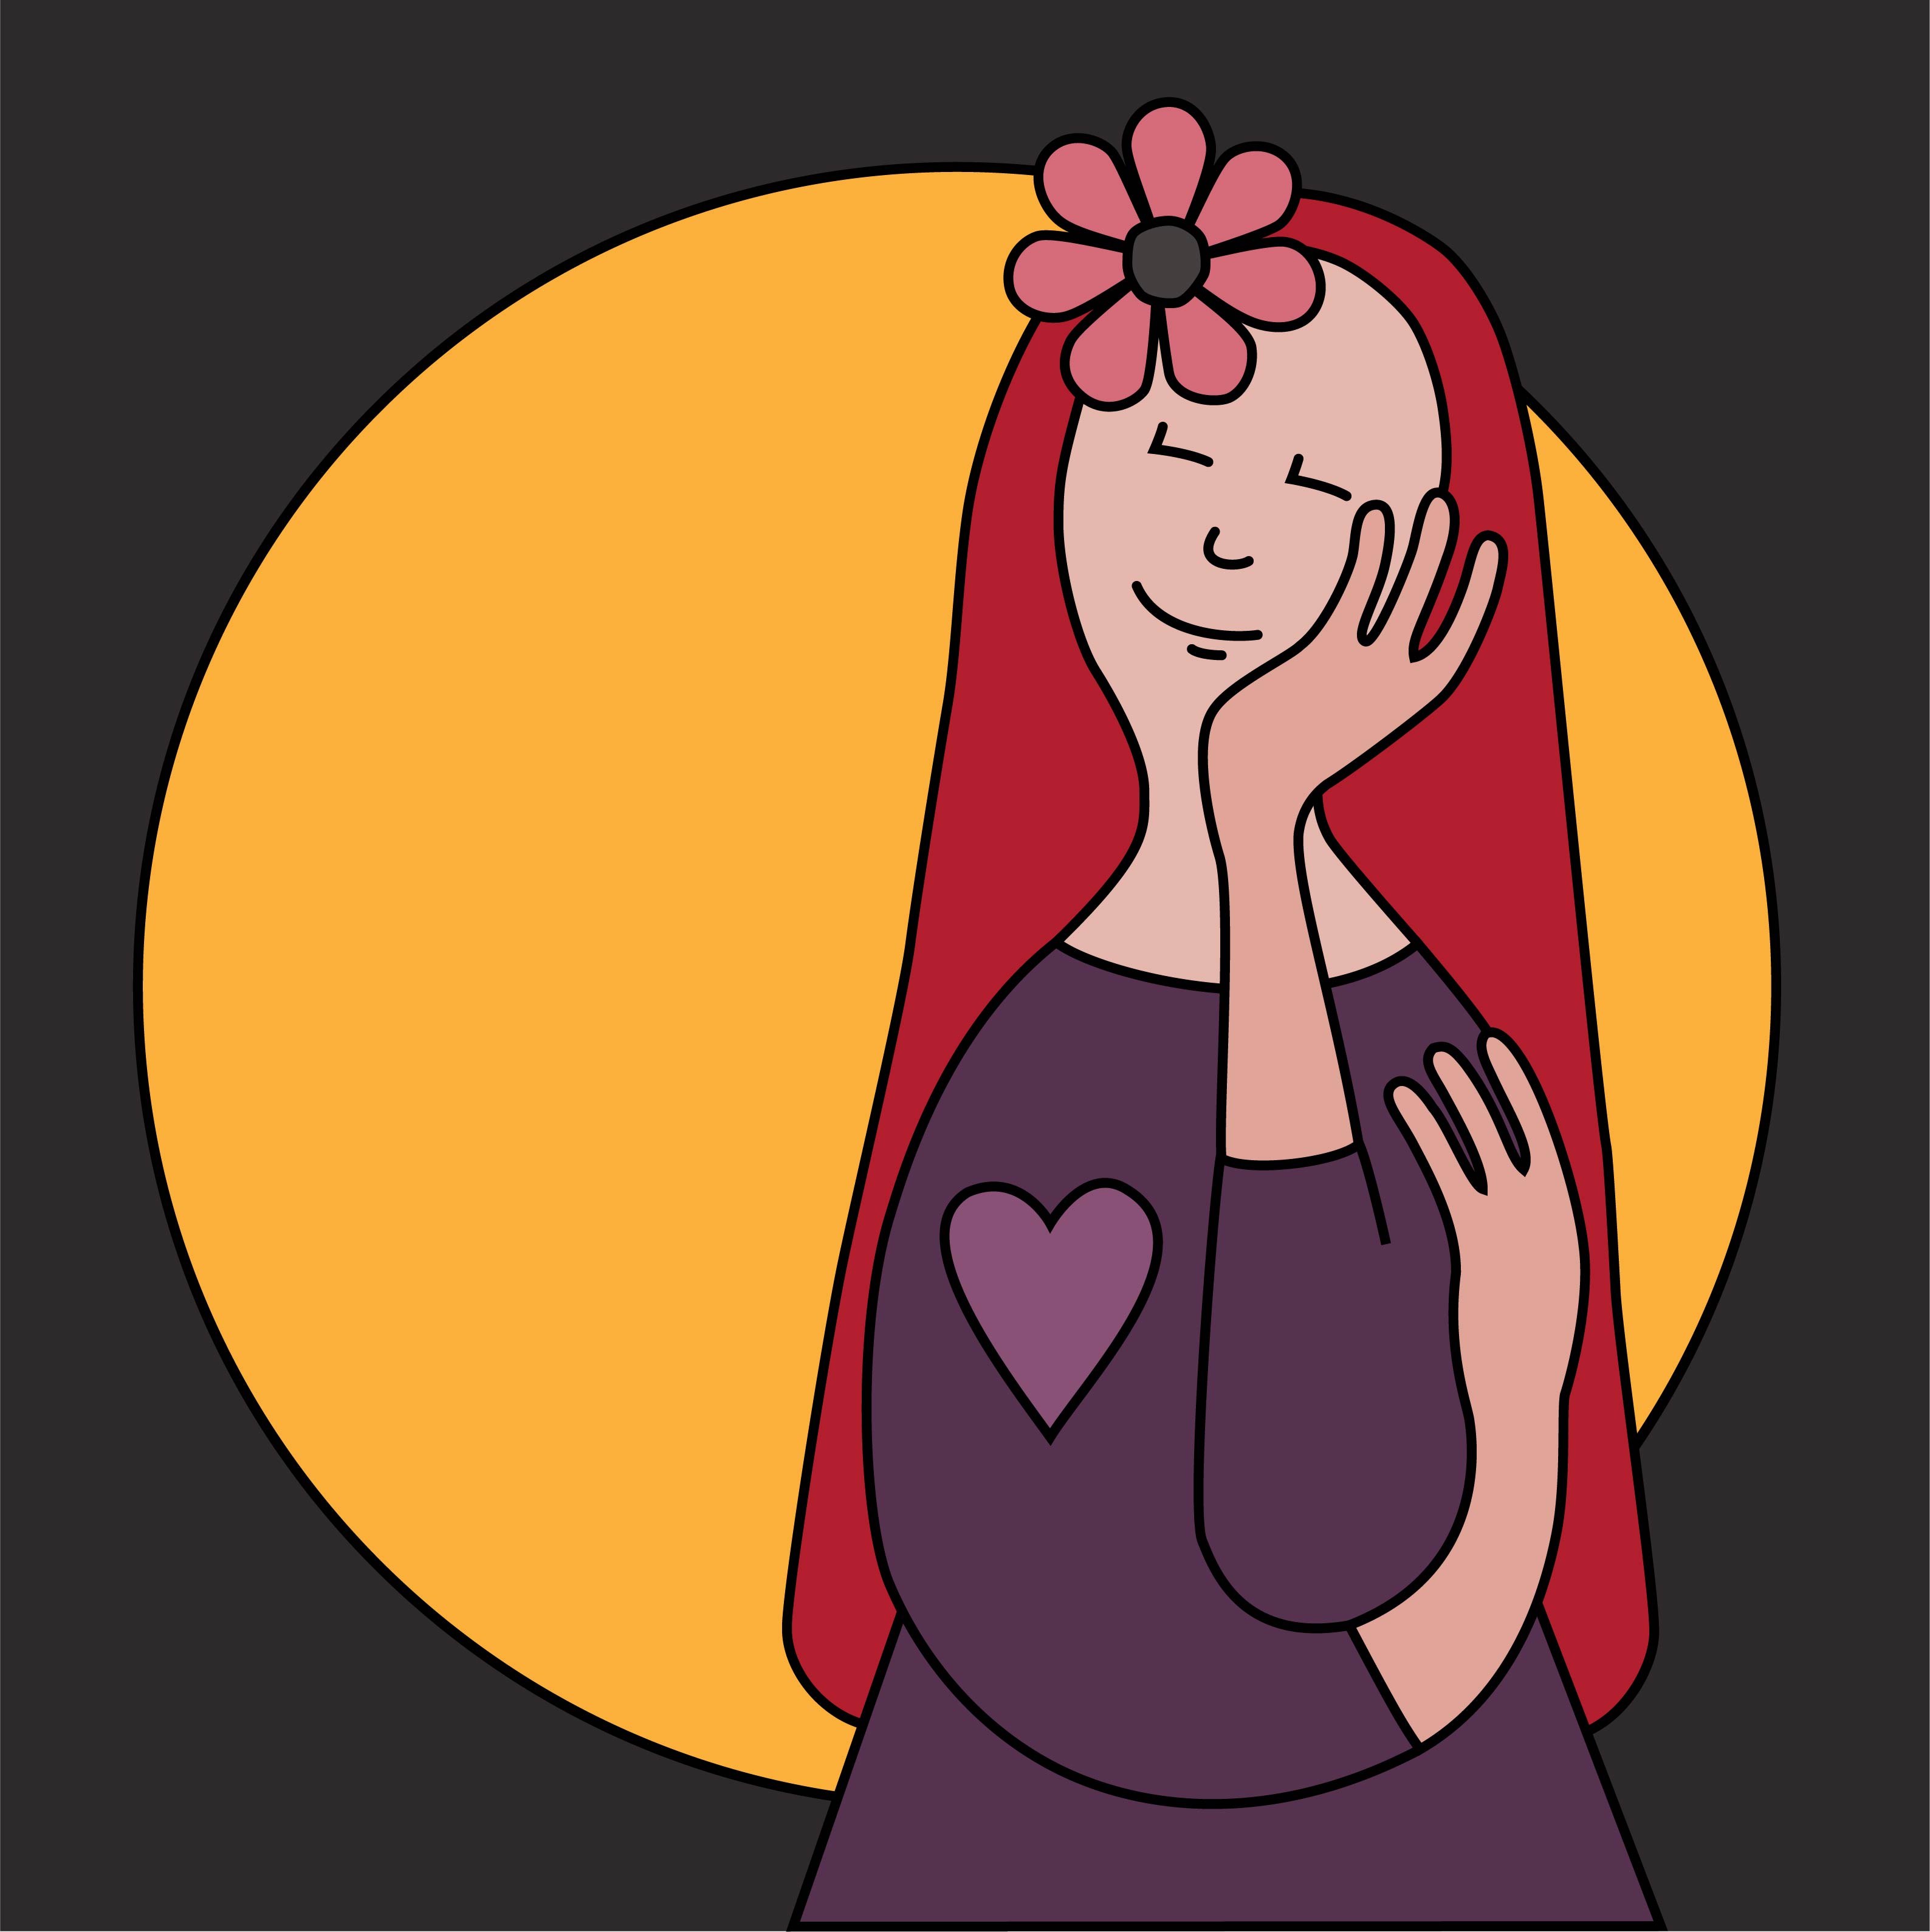 Grey background with yellow circle, drawing of woman with ong red hair, eyes closed looking happy